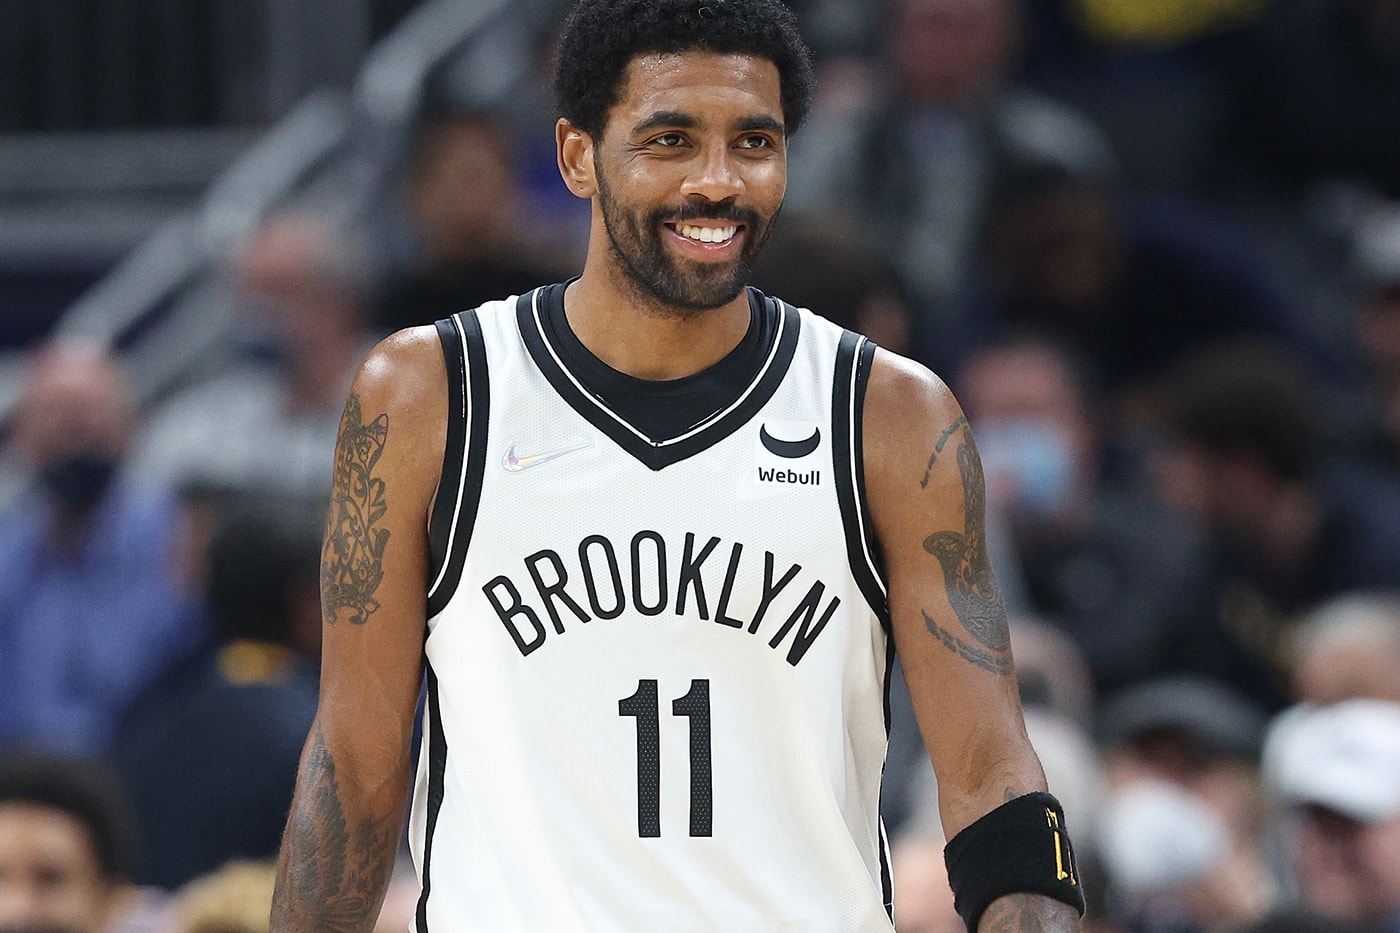 Kyrie Irving Could Play Home Games if Nets Pay Fine